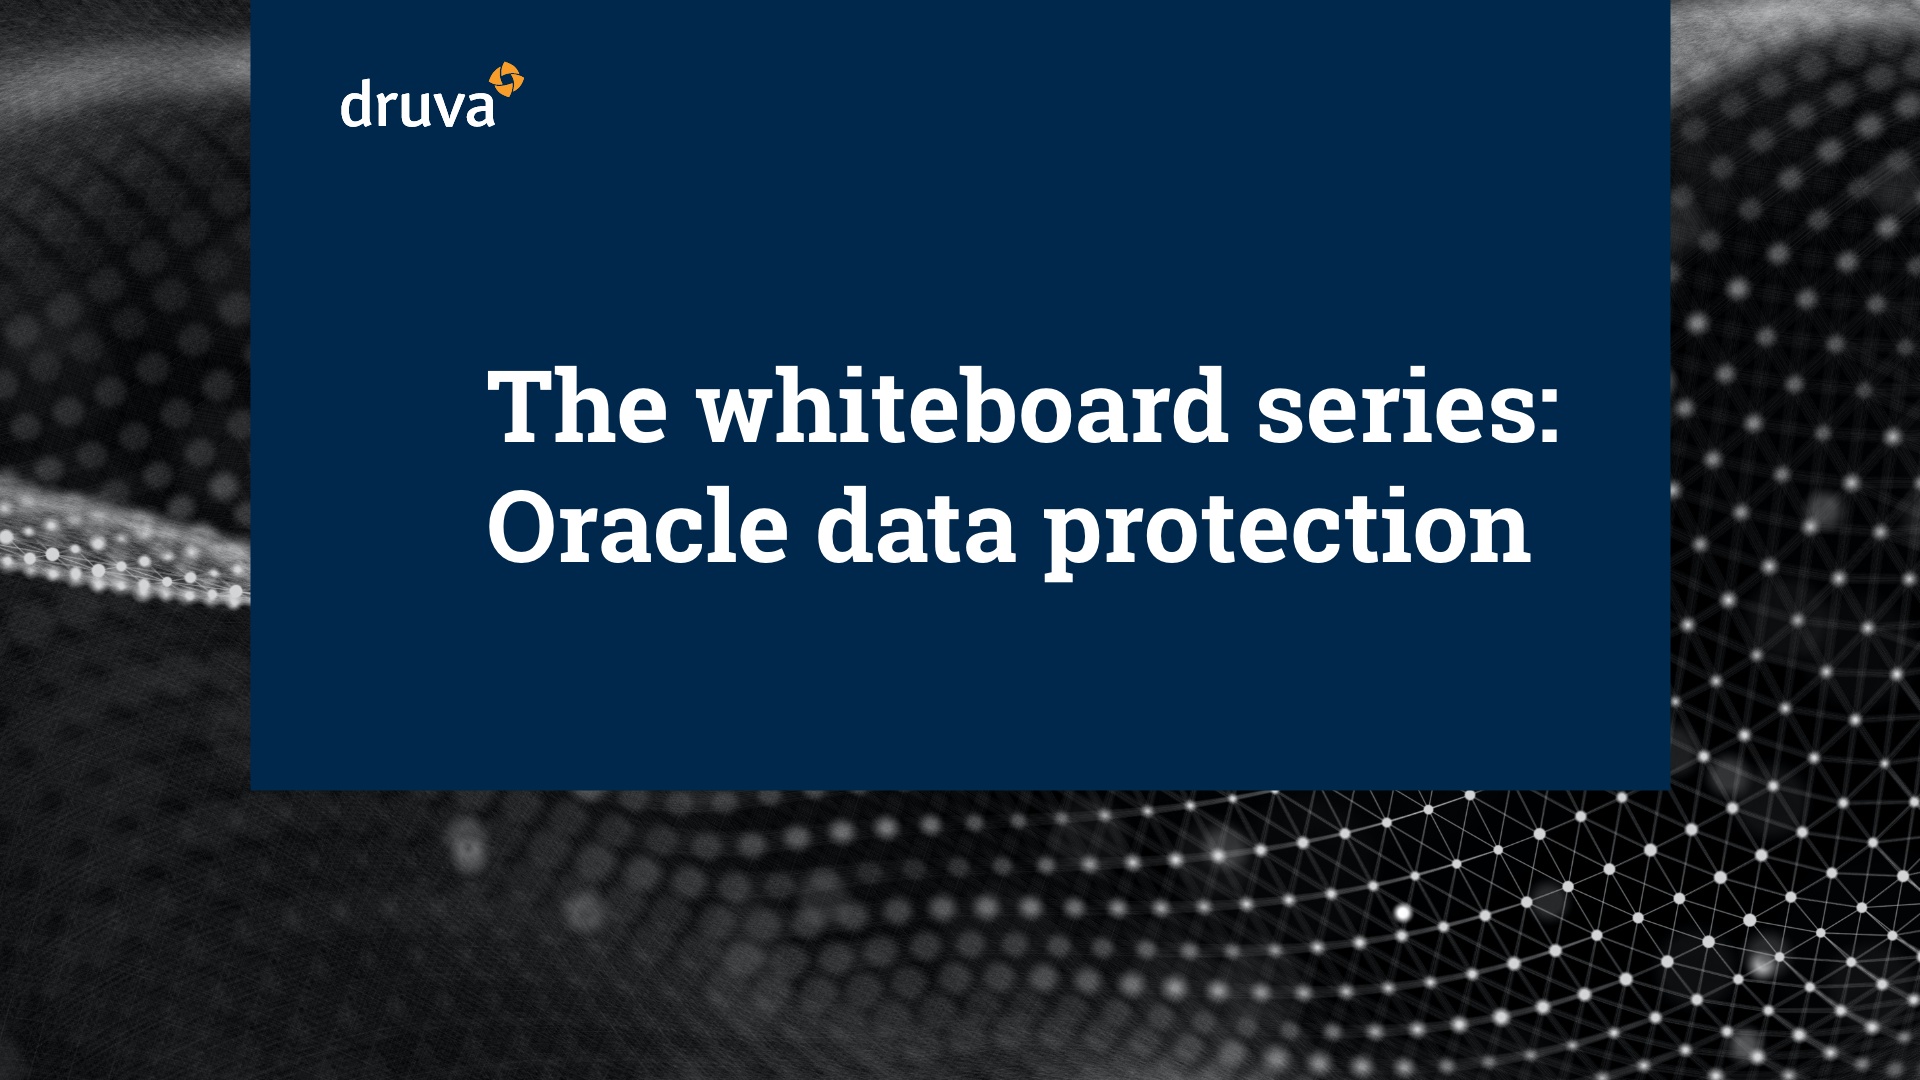 The whiteboard series: Oracle data protection